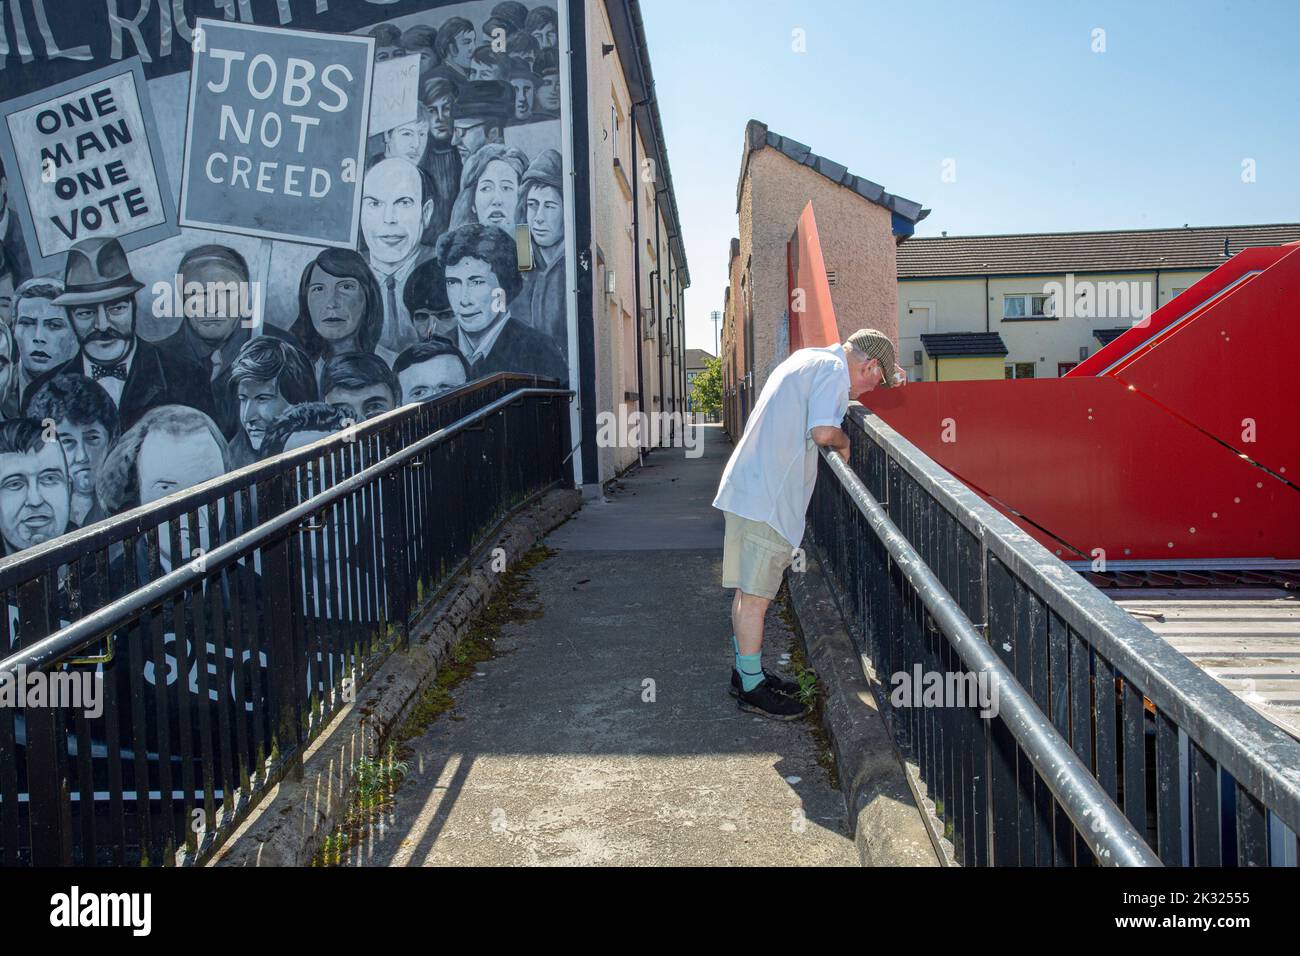 A mural in Derry depicting events during the Troubles in Northern Ireland .© Horst A. Friedrichs Stock Photo